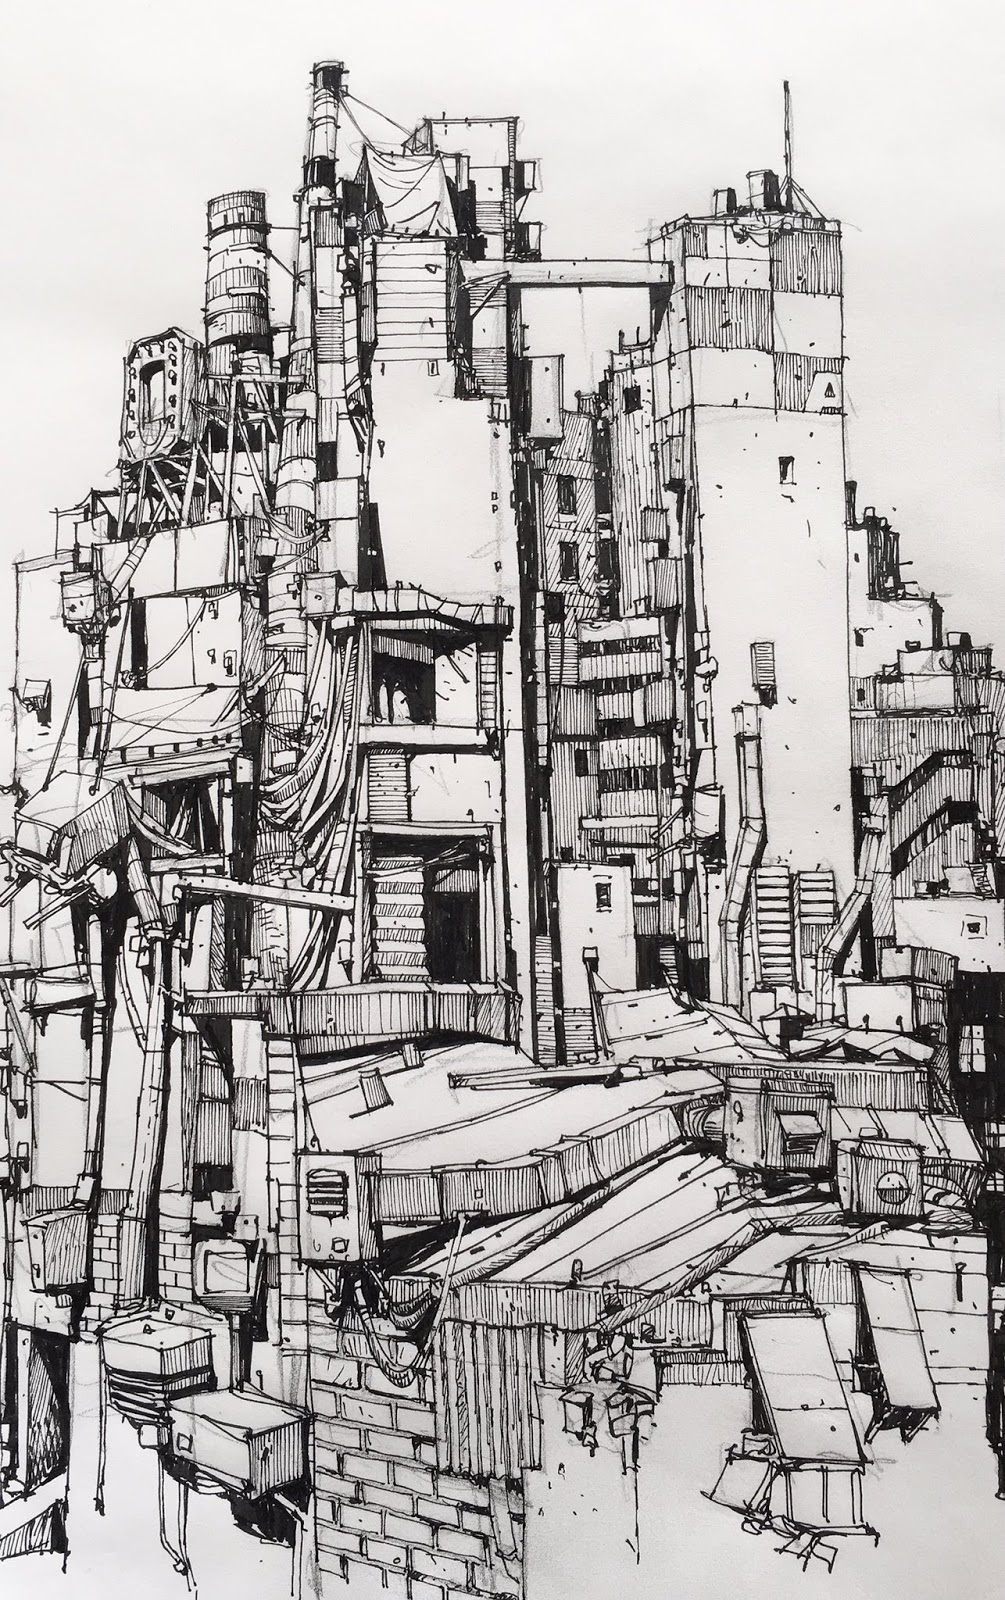 The Inspirational Art of Ian McQue  this northern boy